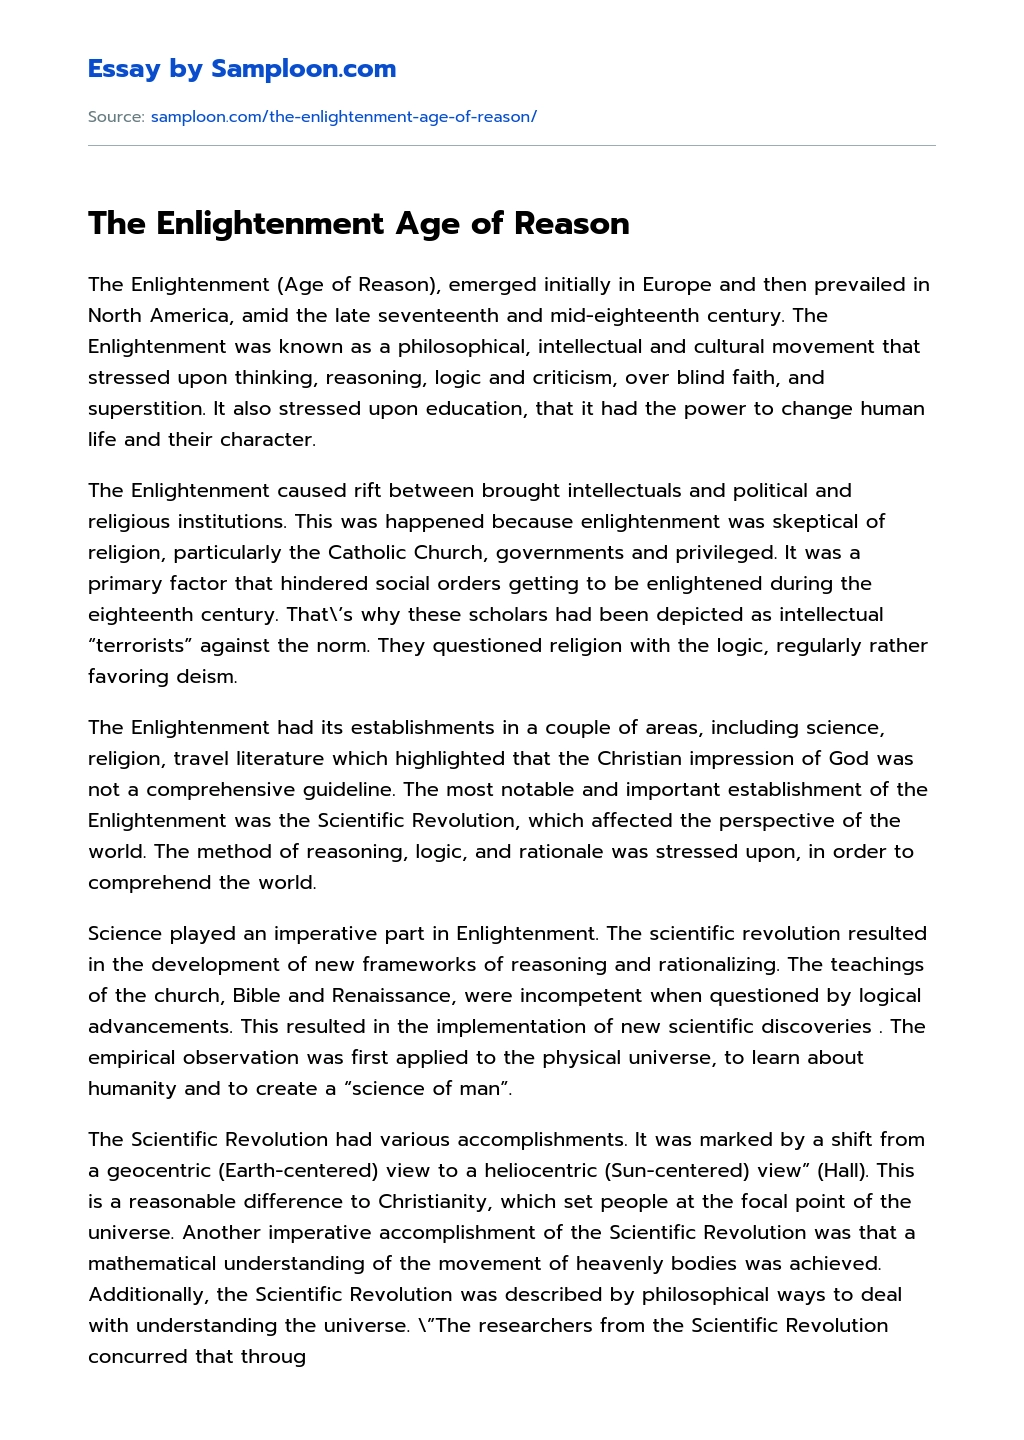 The Enlightenment Age of Reason essay